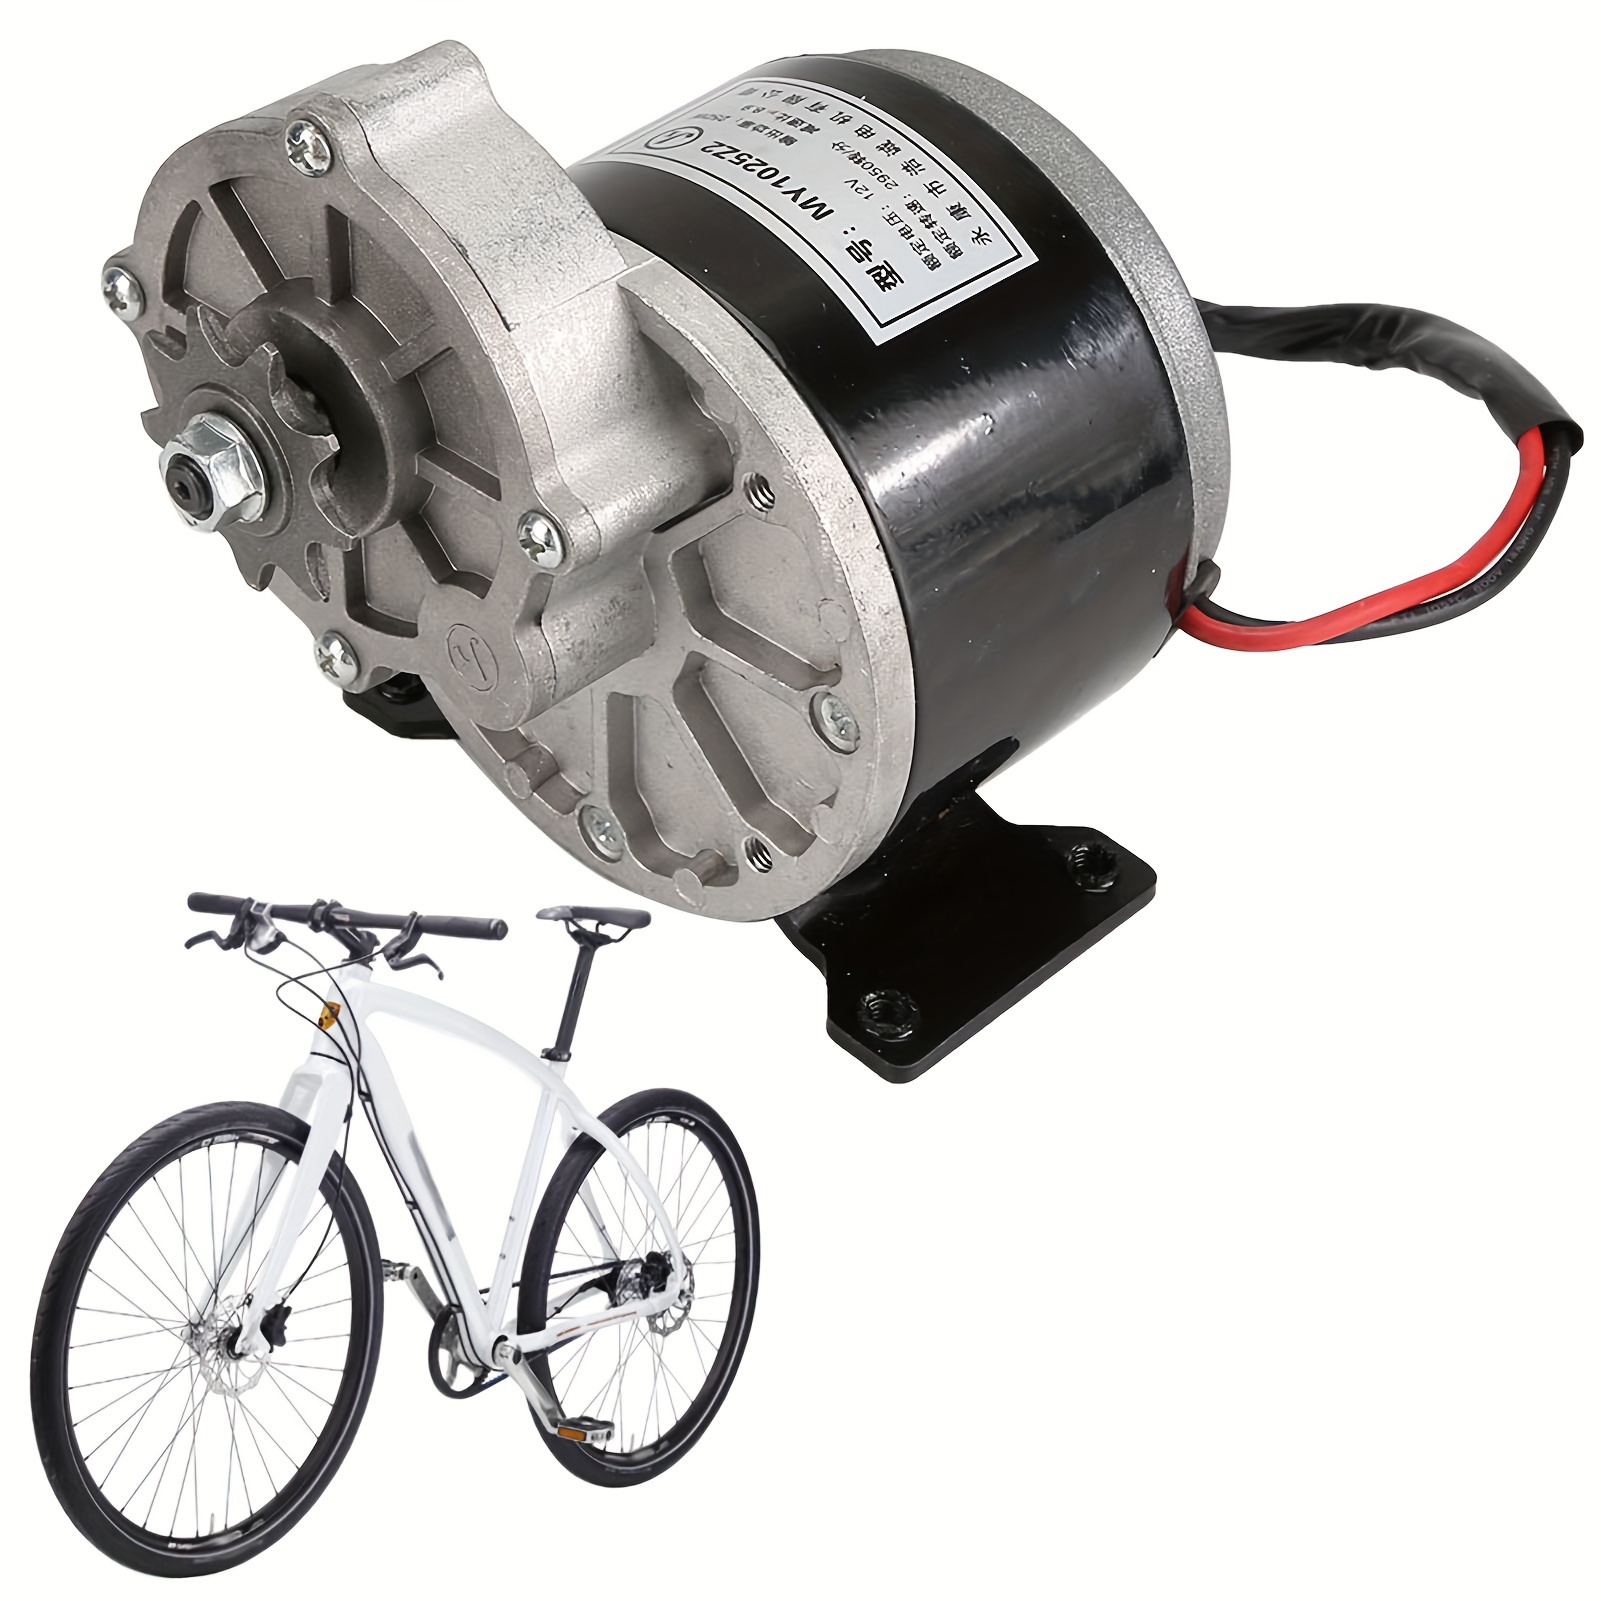 

Gear Reducer Motor - High Torque Electric Motor For Electric Bike Scooter With 9 Teeth Pinion